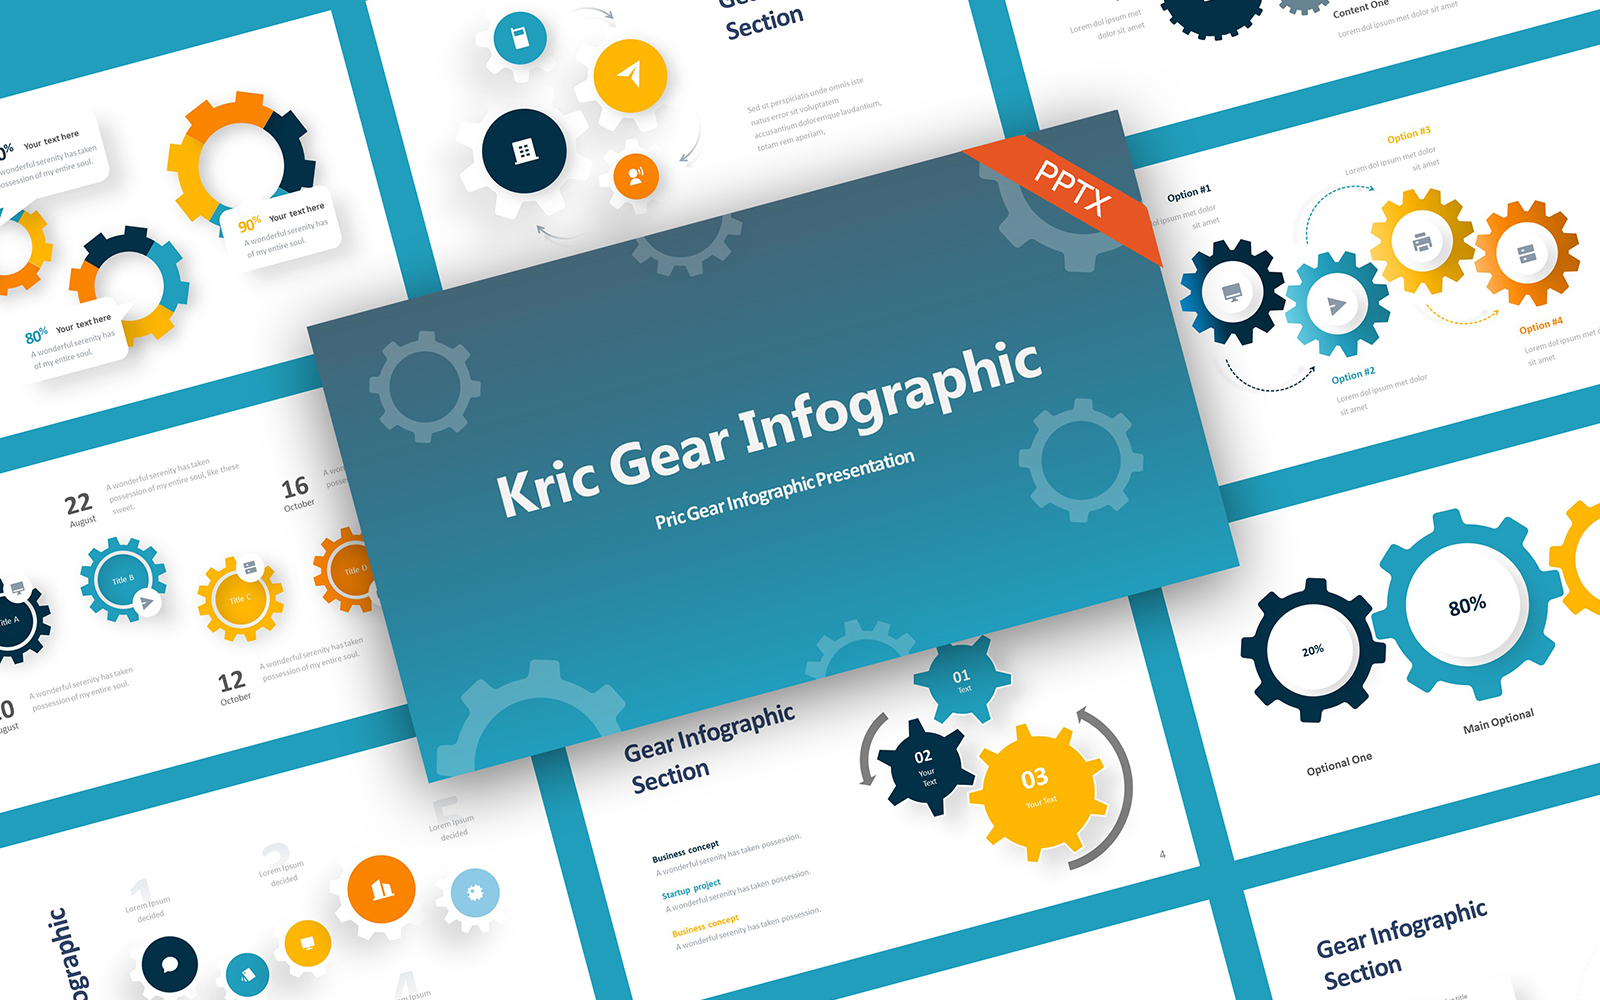 Kric Gear Infographic PowerPoint Template